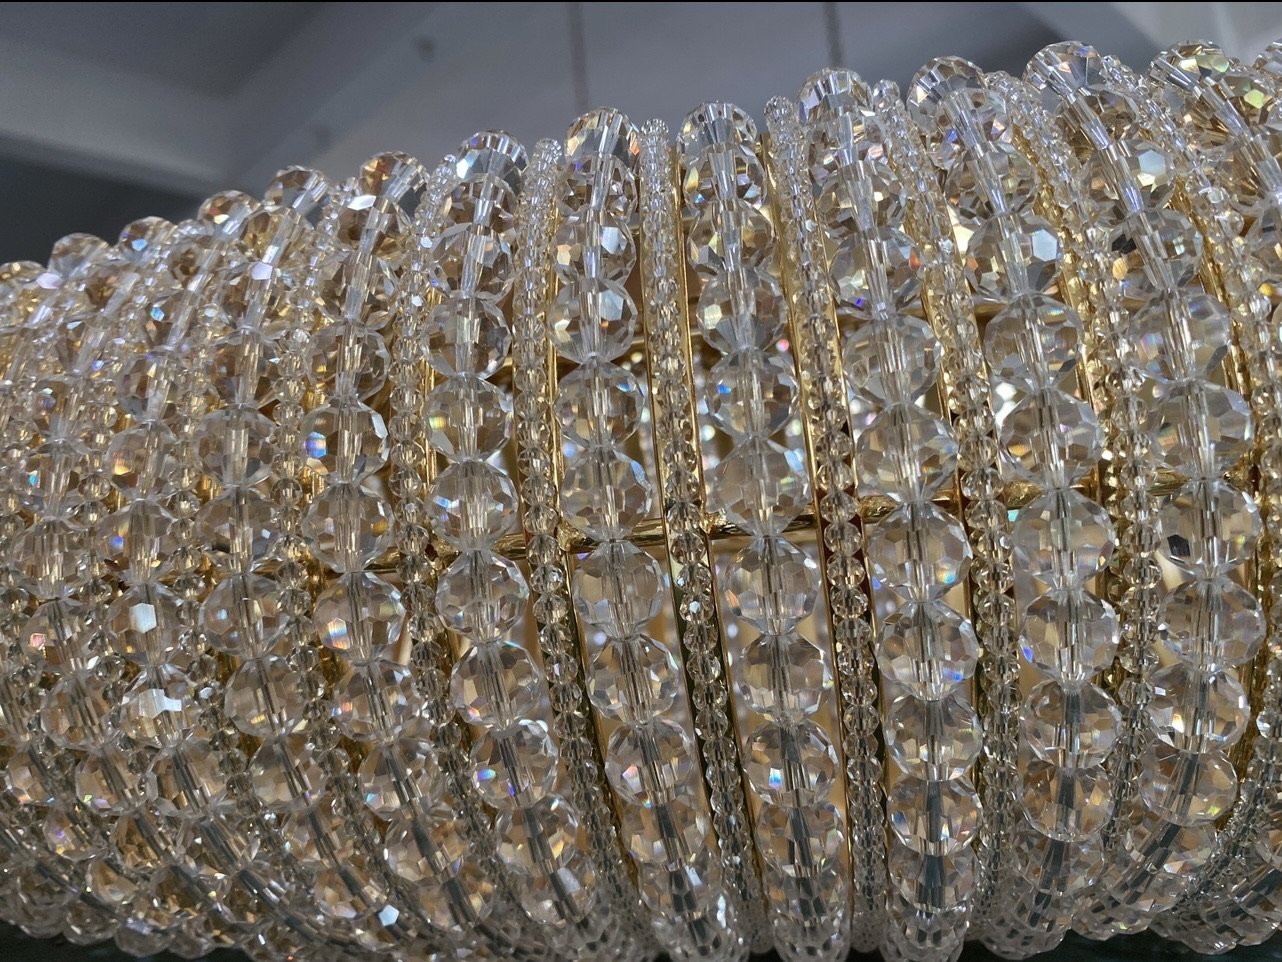 Empire Round Crystal Ring Beaded Chandelier - Italian Concept